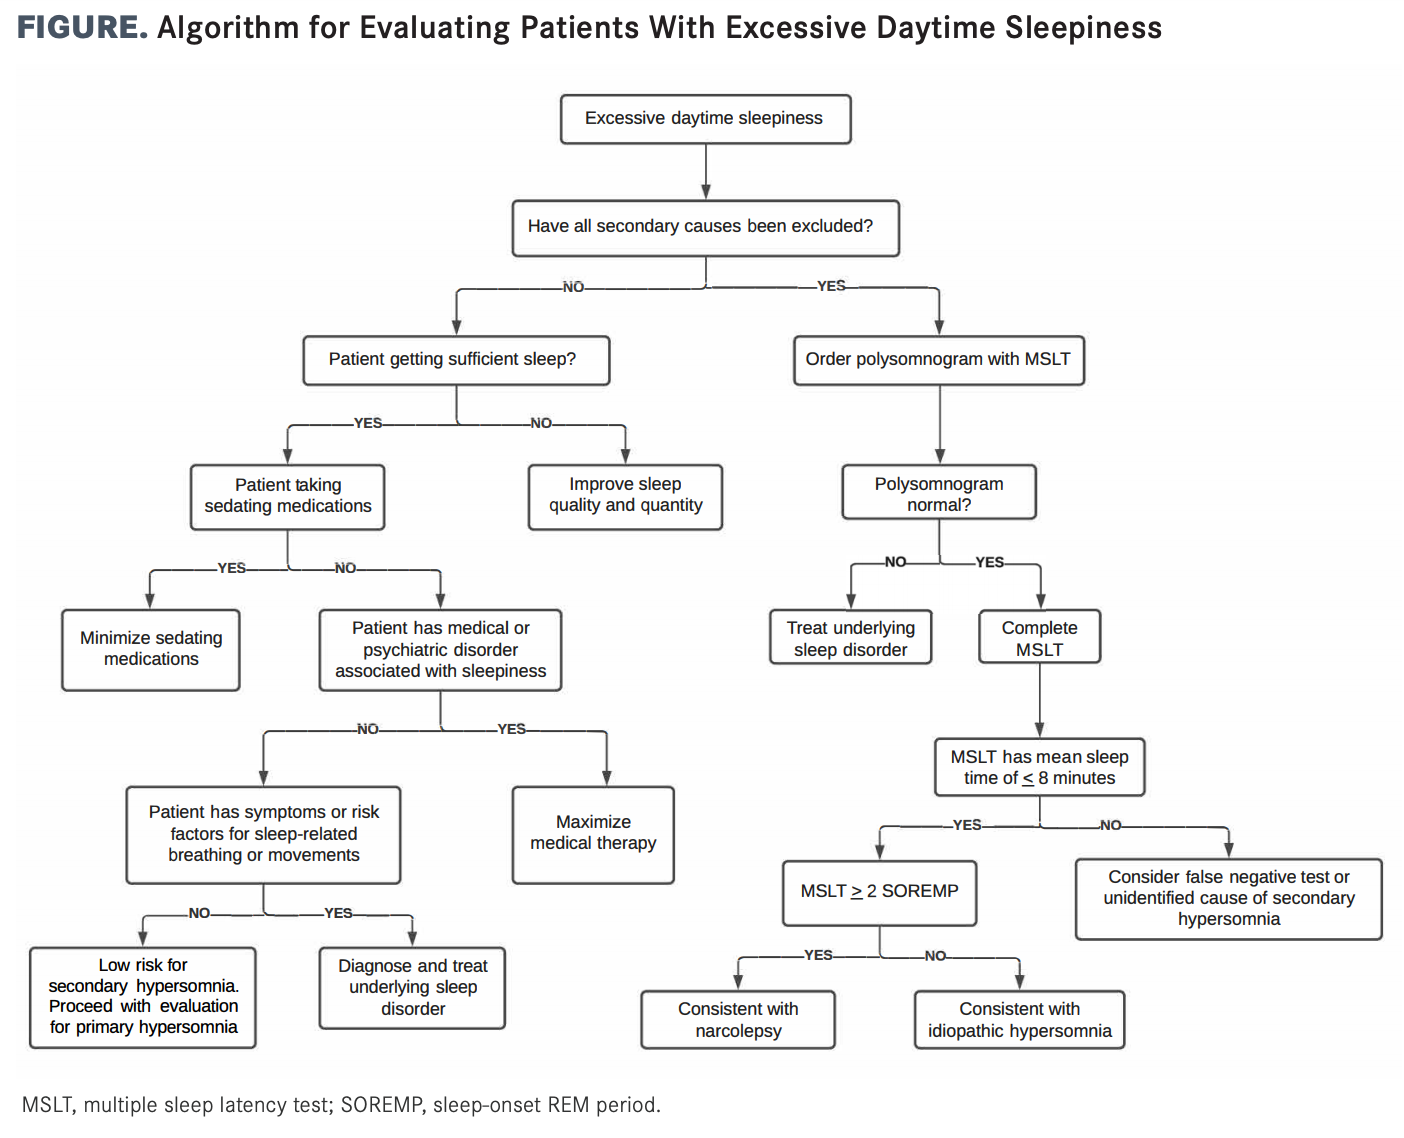 FIGURE. Algorithm for Evaluating Patients With Excessive Daytime Sleepiness. (click to enlarge)